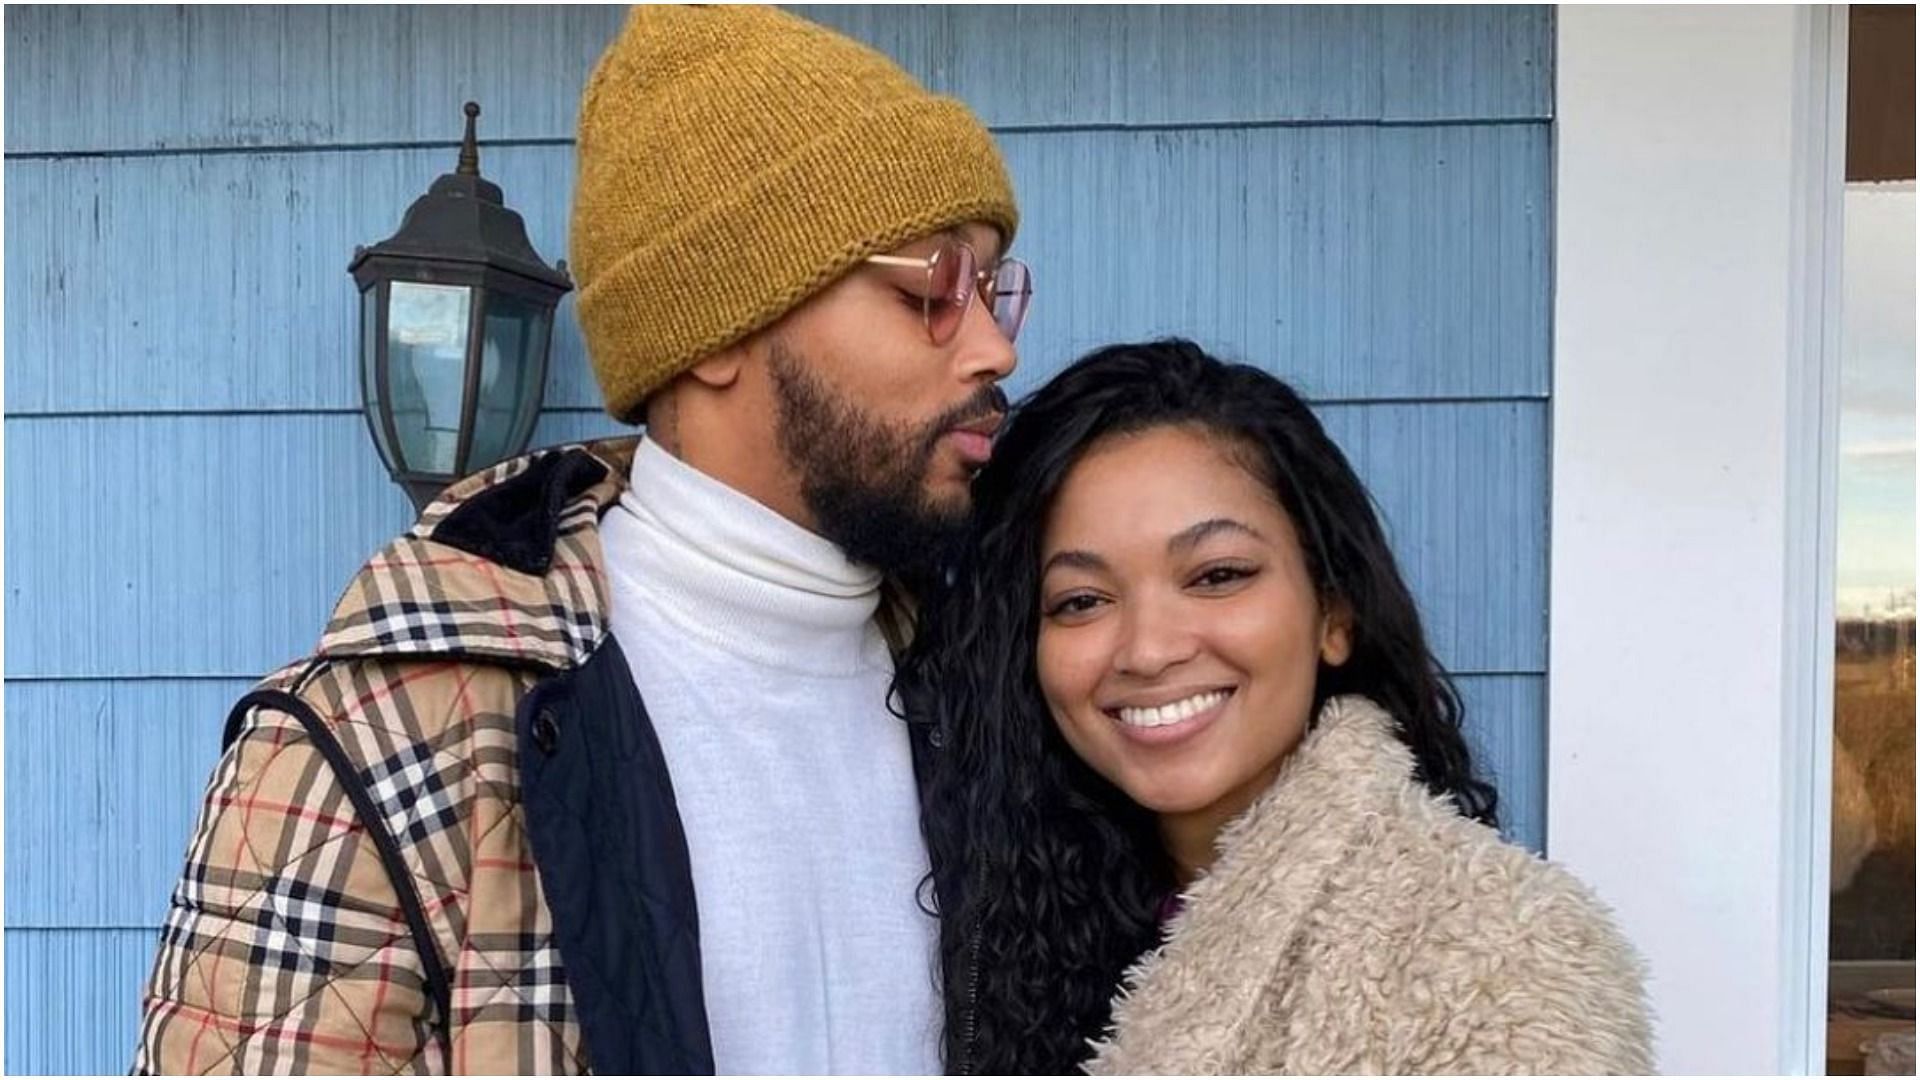 Romeo Miller and Drew Sangster made their relationship official in November 2020 (Image via romeomiller/Instagram)